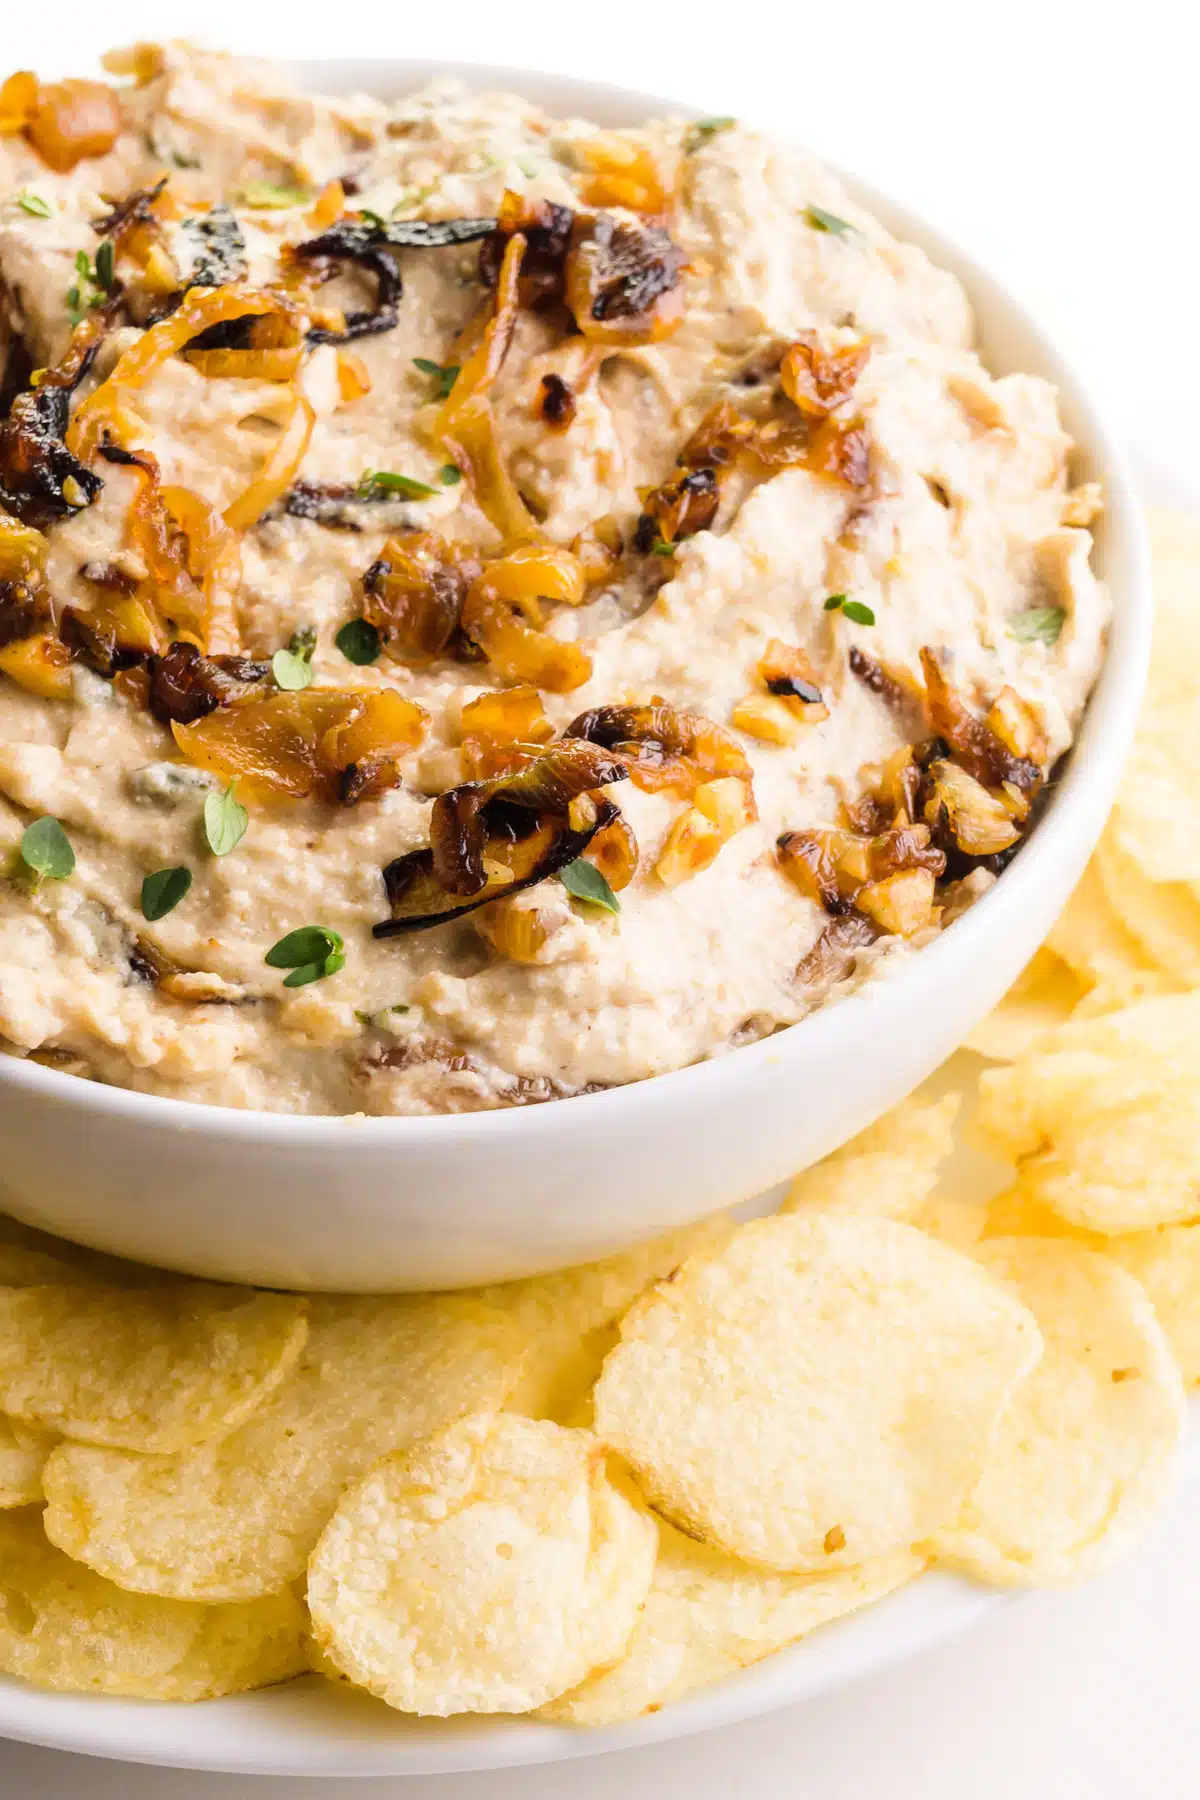 A bowl of vegan French onion dip sits on a plate with potato chips.